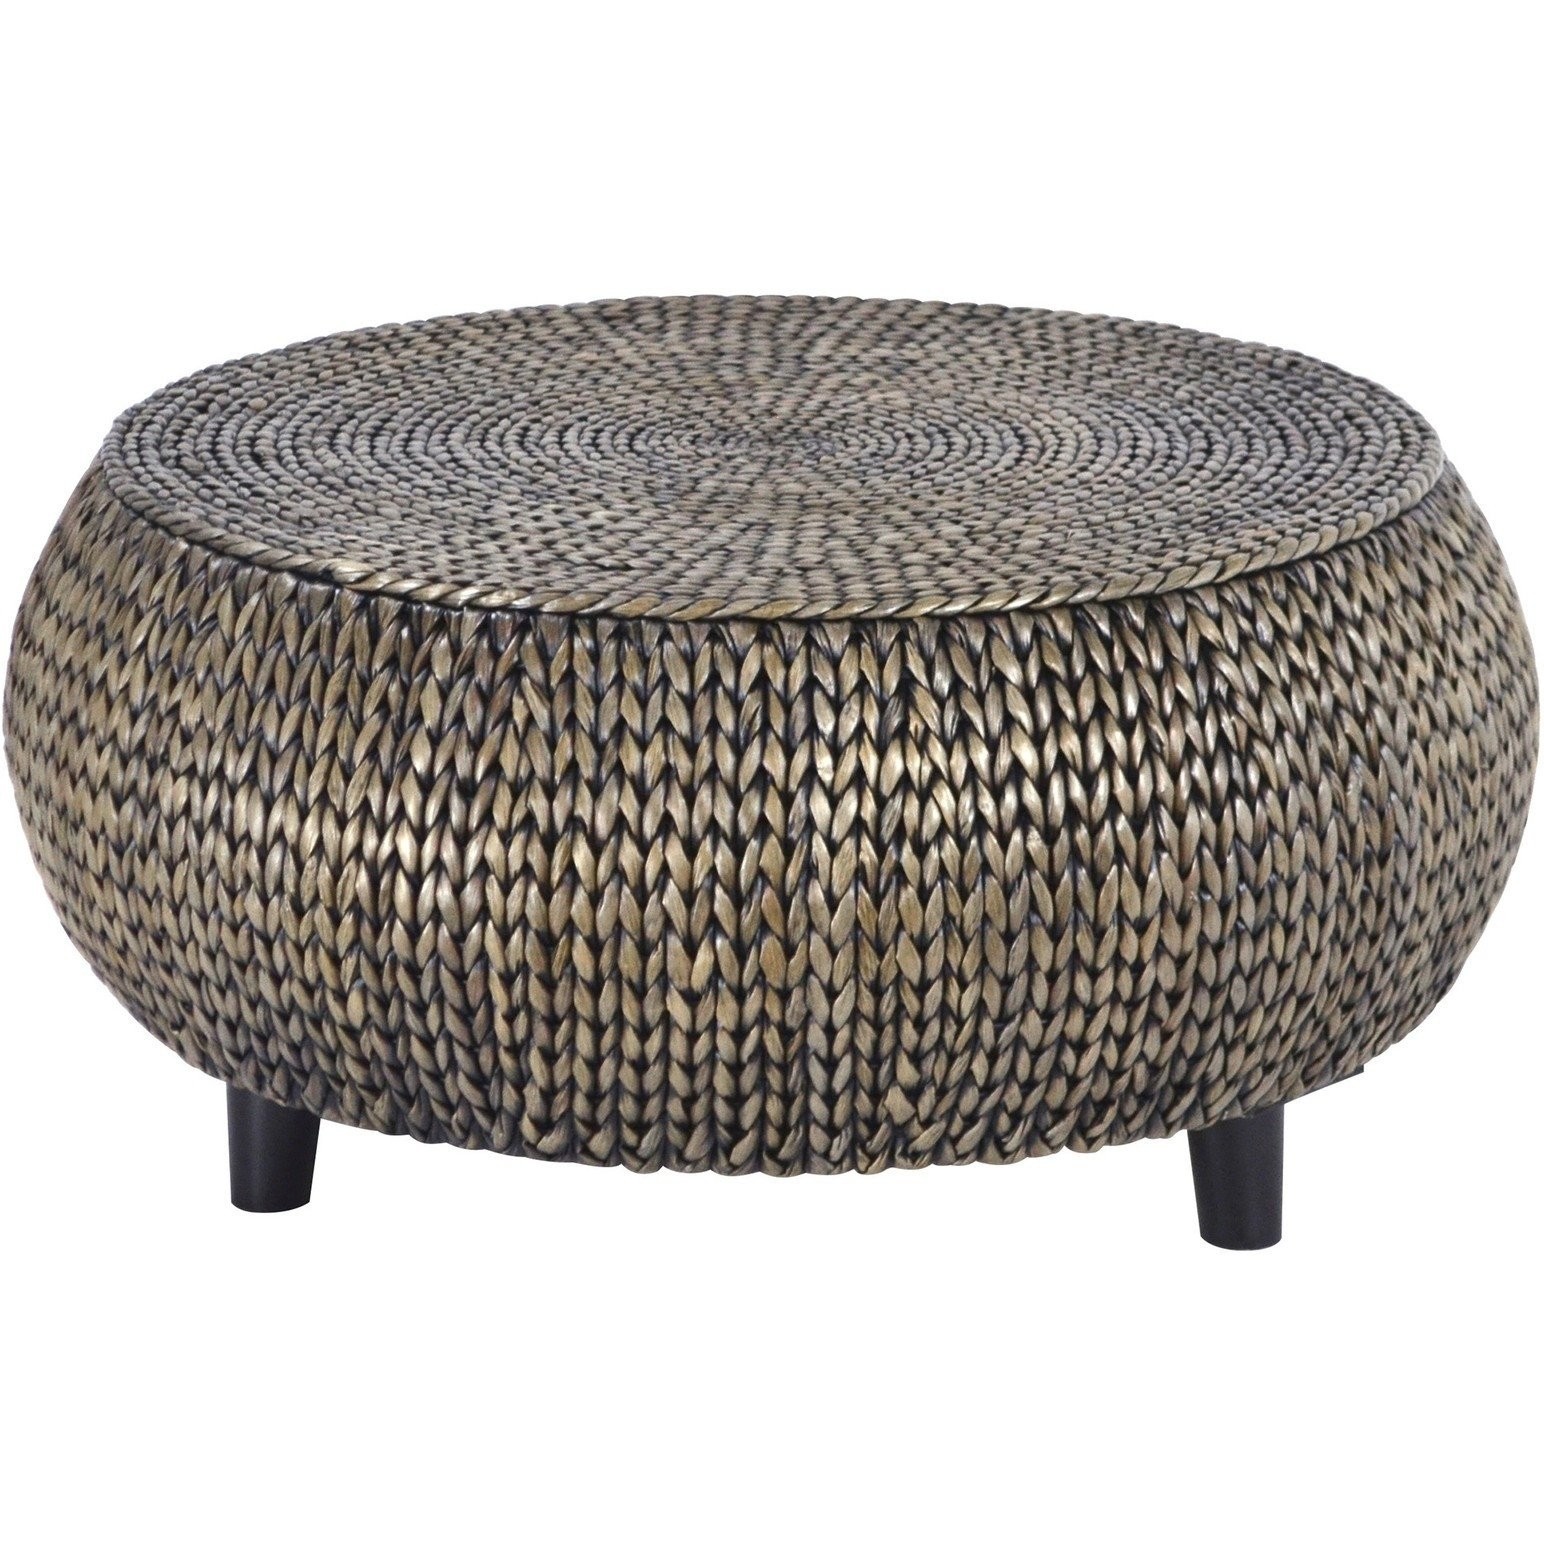 Bali breeze coffee table by gallerie decor coffee table